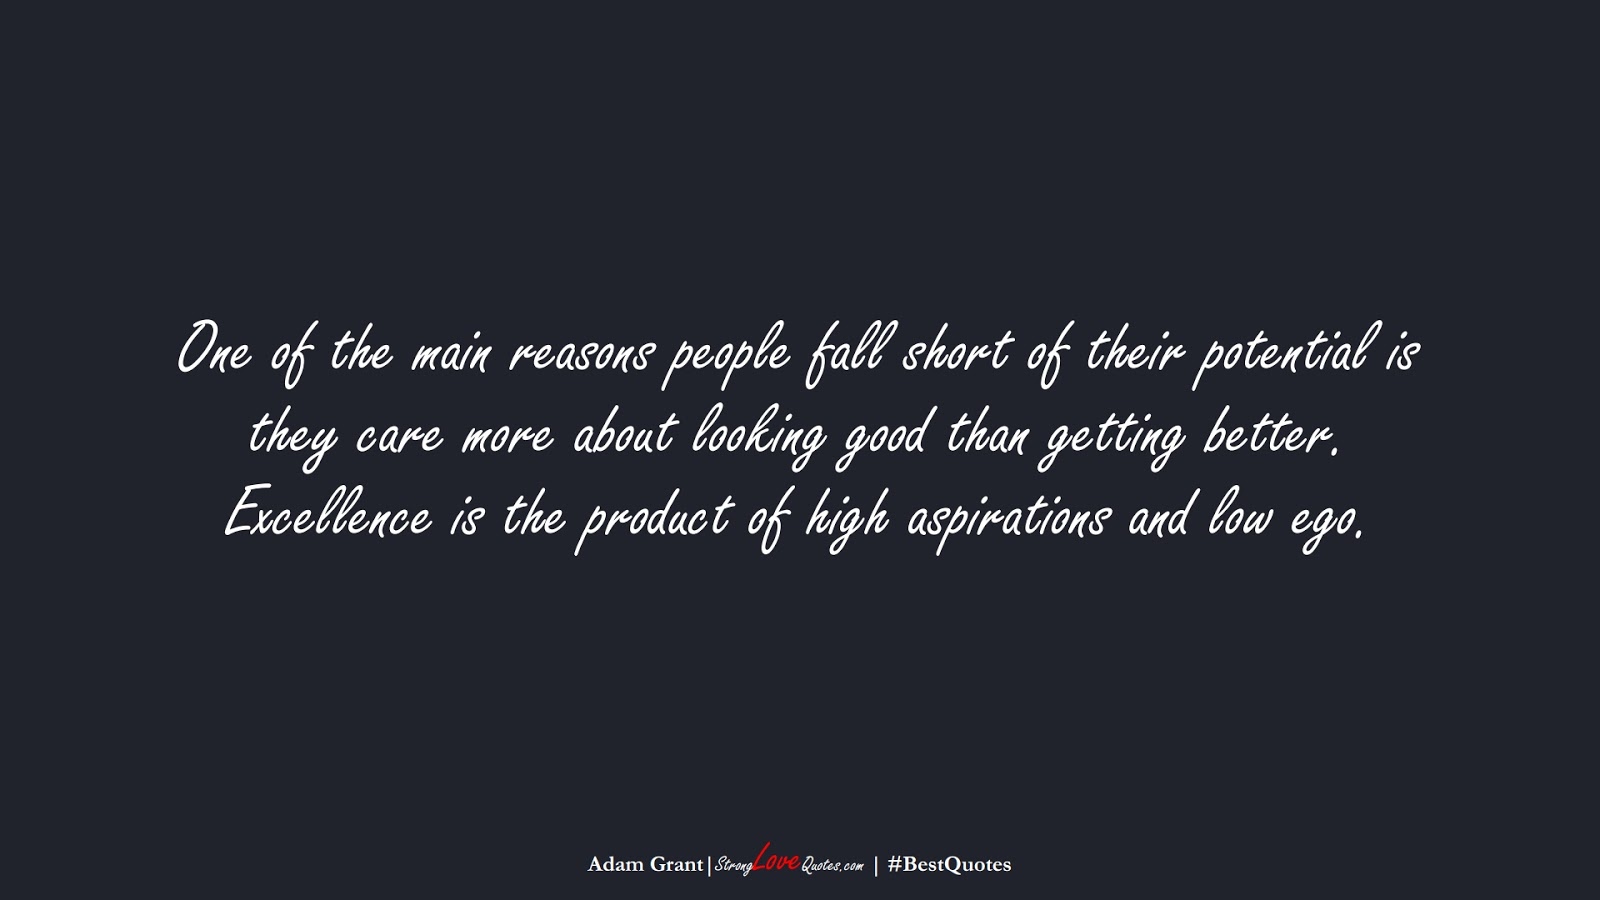 One of the main reasons people fall short of their potential is they care more about looking good than getting better. Excellence is the product of high aspirations and low ego. (Adam Grant);  #BestQuotes